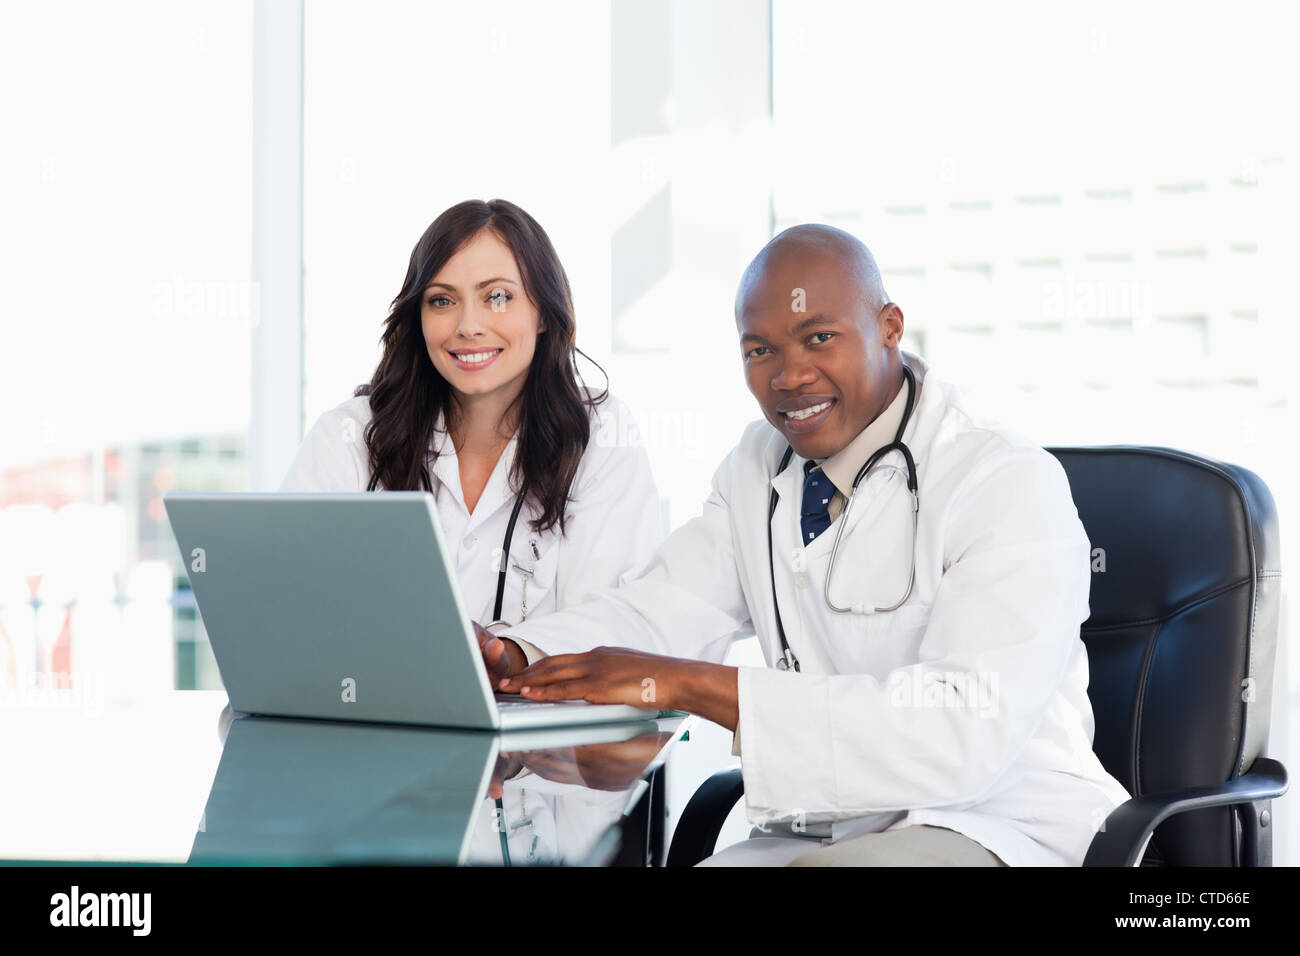 Two nurses working seriously while sitting at the desk in a well lit room Stock Photo